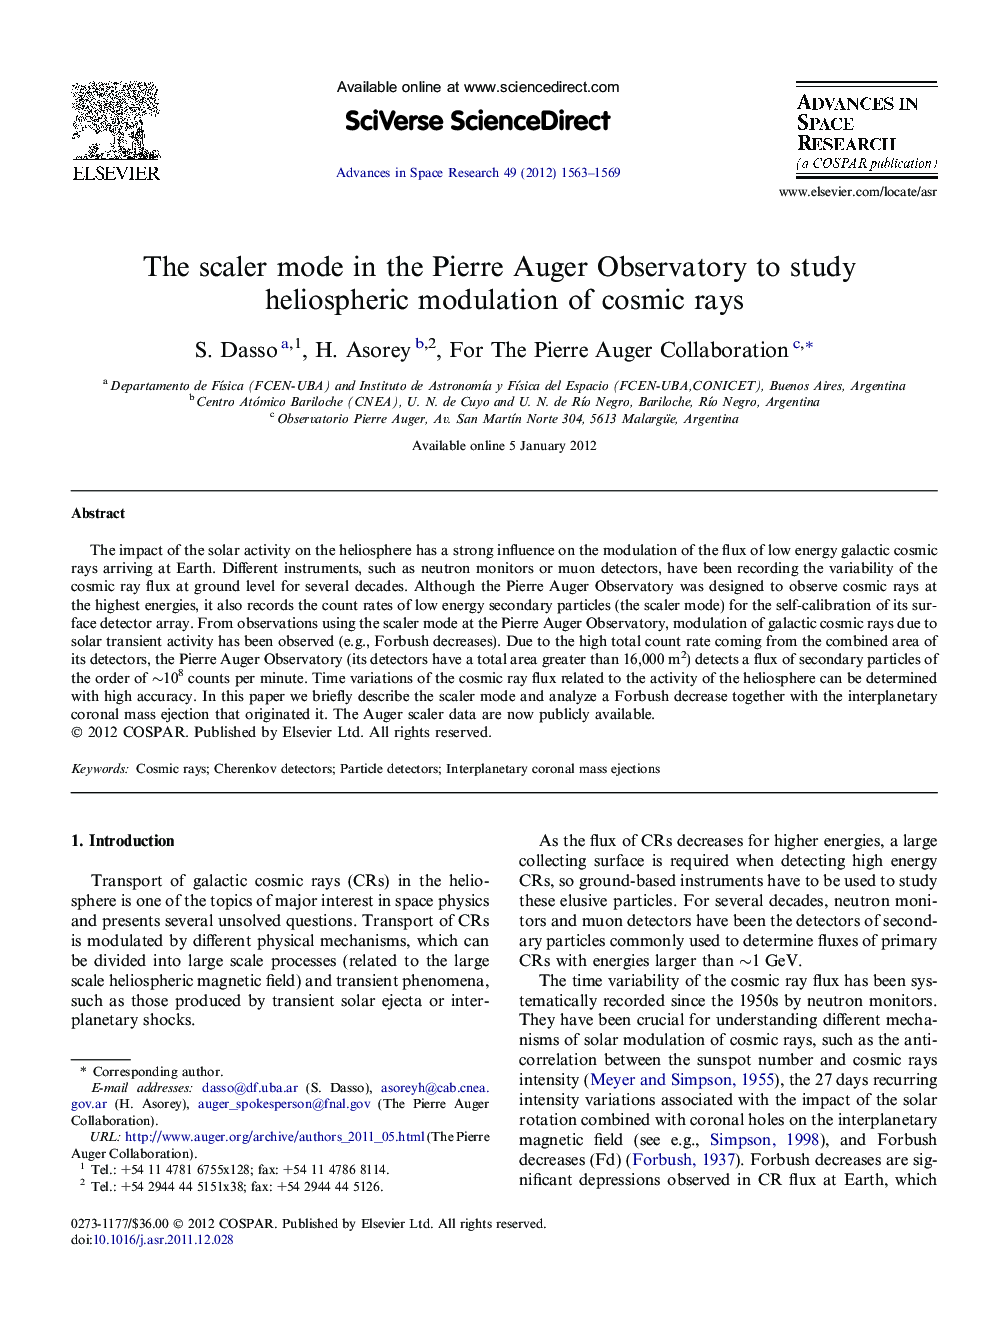 The scaler mode in the Pierre Auger Observatory to study heliospheric modulation of cosmic rays